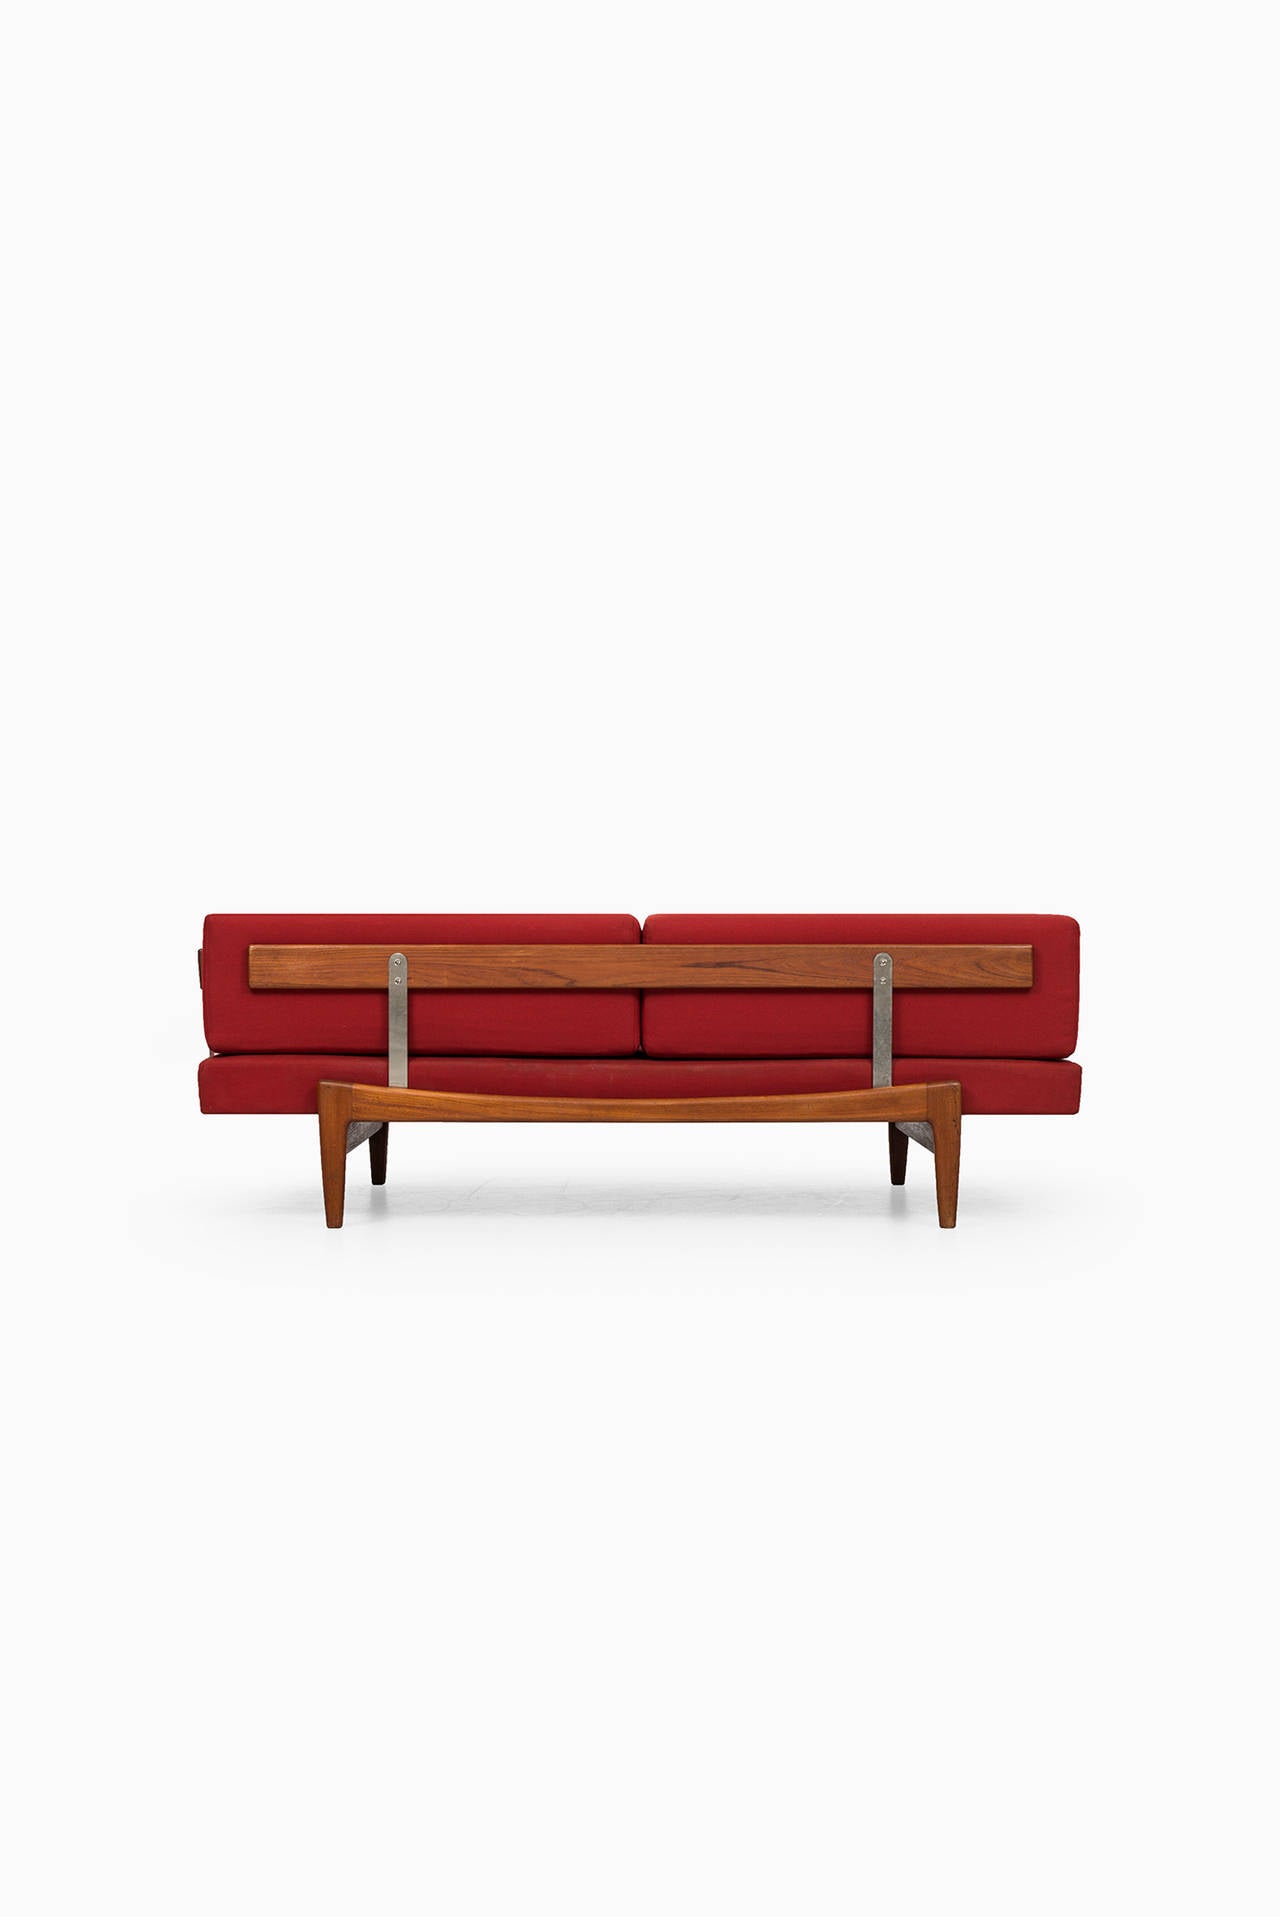 Mid-20th Century Ib Kofod-Larsen Daybed in Teak and Red Fabric by Seffle möbelfabrik in Sweden